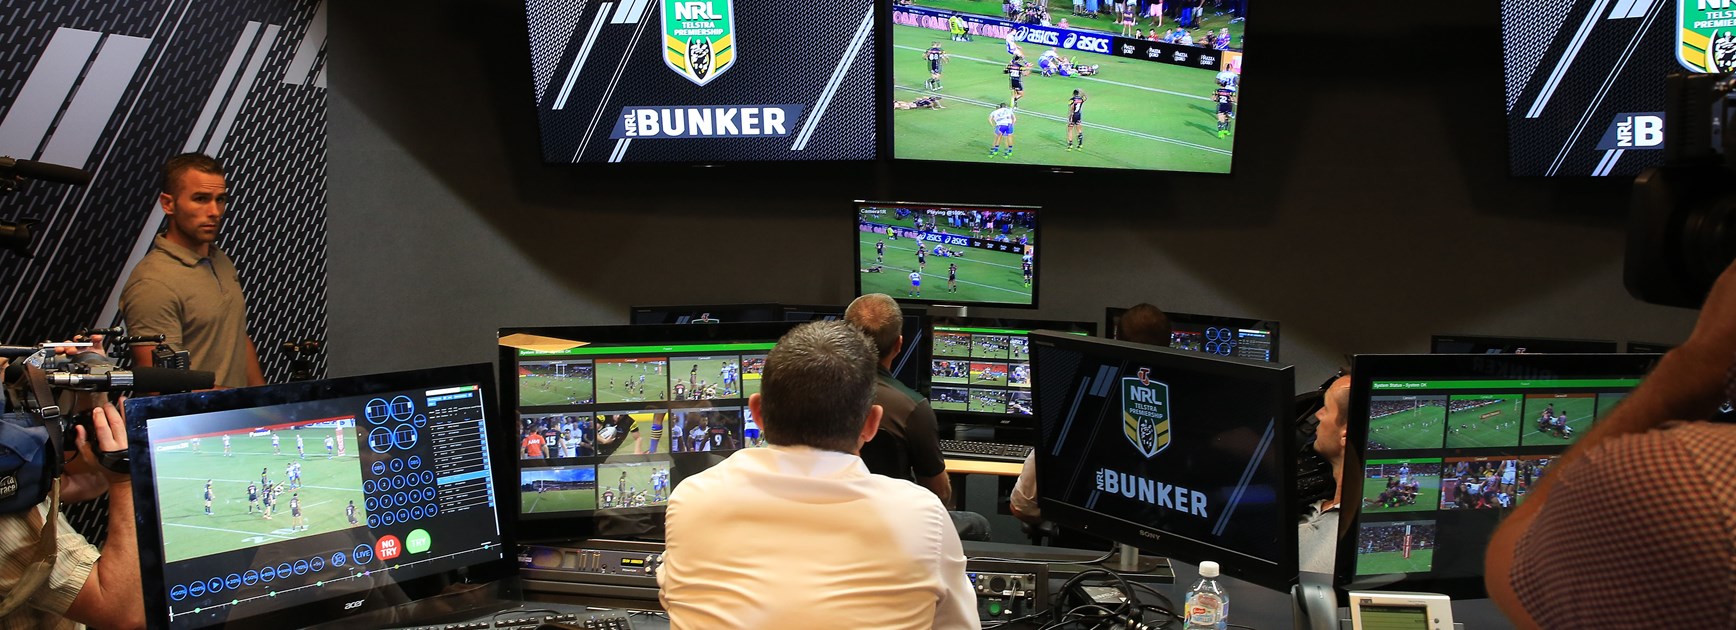 Bunker's two-pronged attack to combat concussion concerns